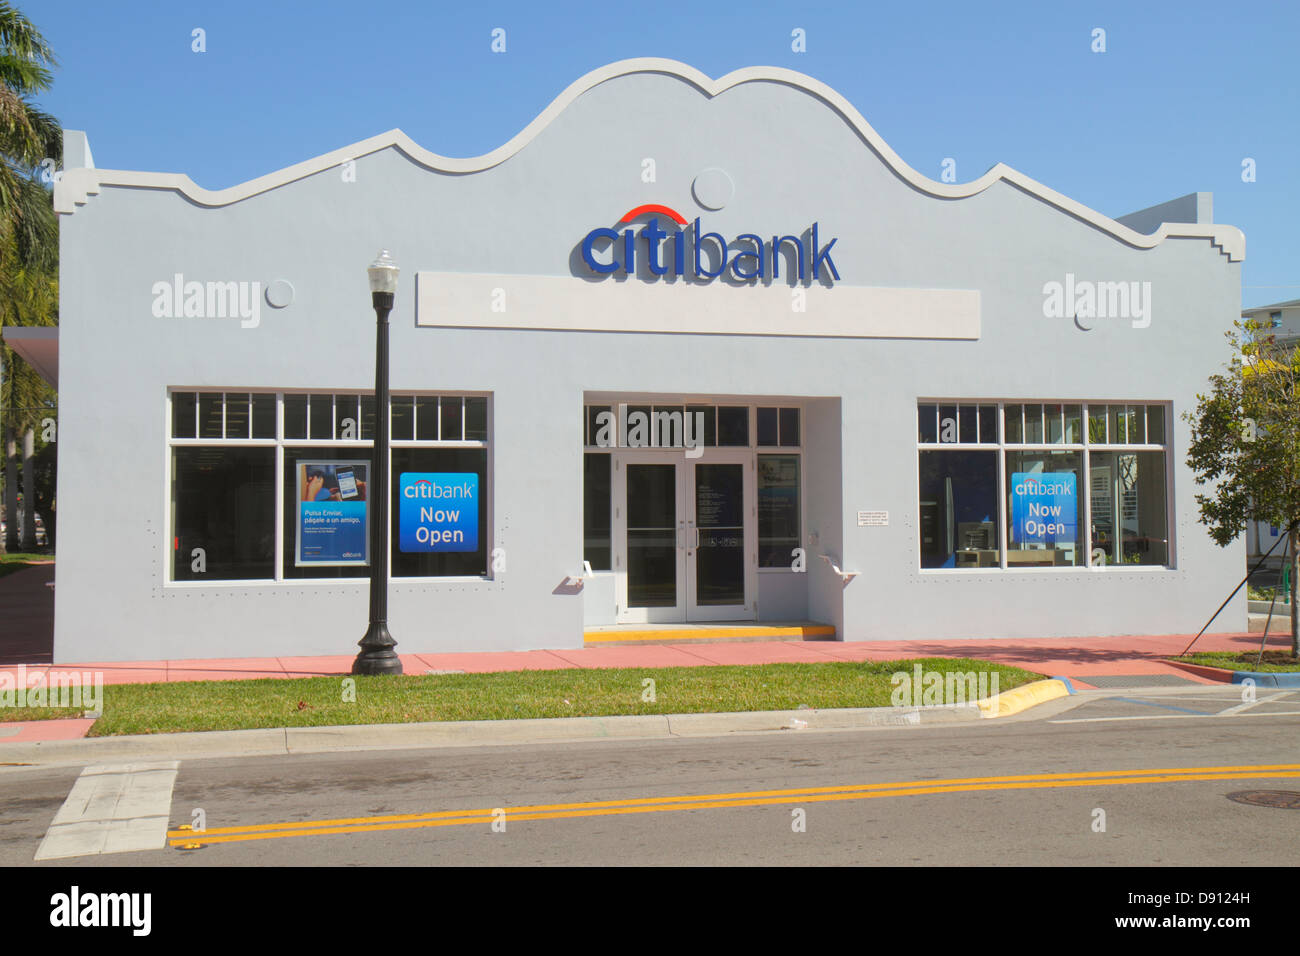 Miami Beach Florida,Citibank,sign,now open,new,banking,front,entrance,building,bank,banking,branch,FL130129003 Stock Photo